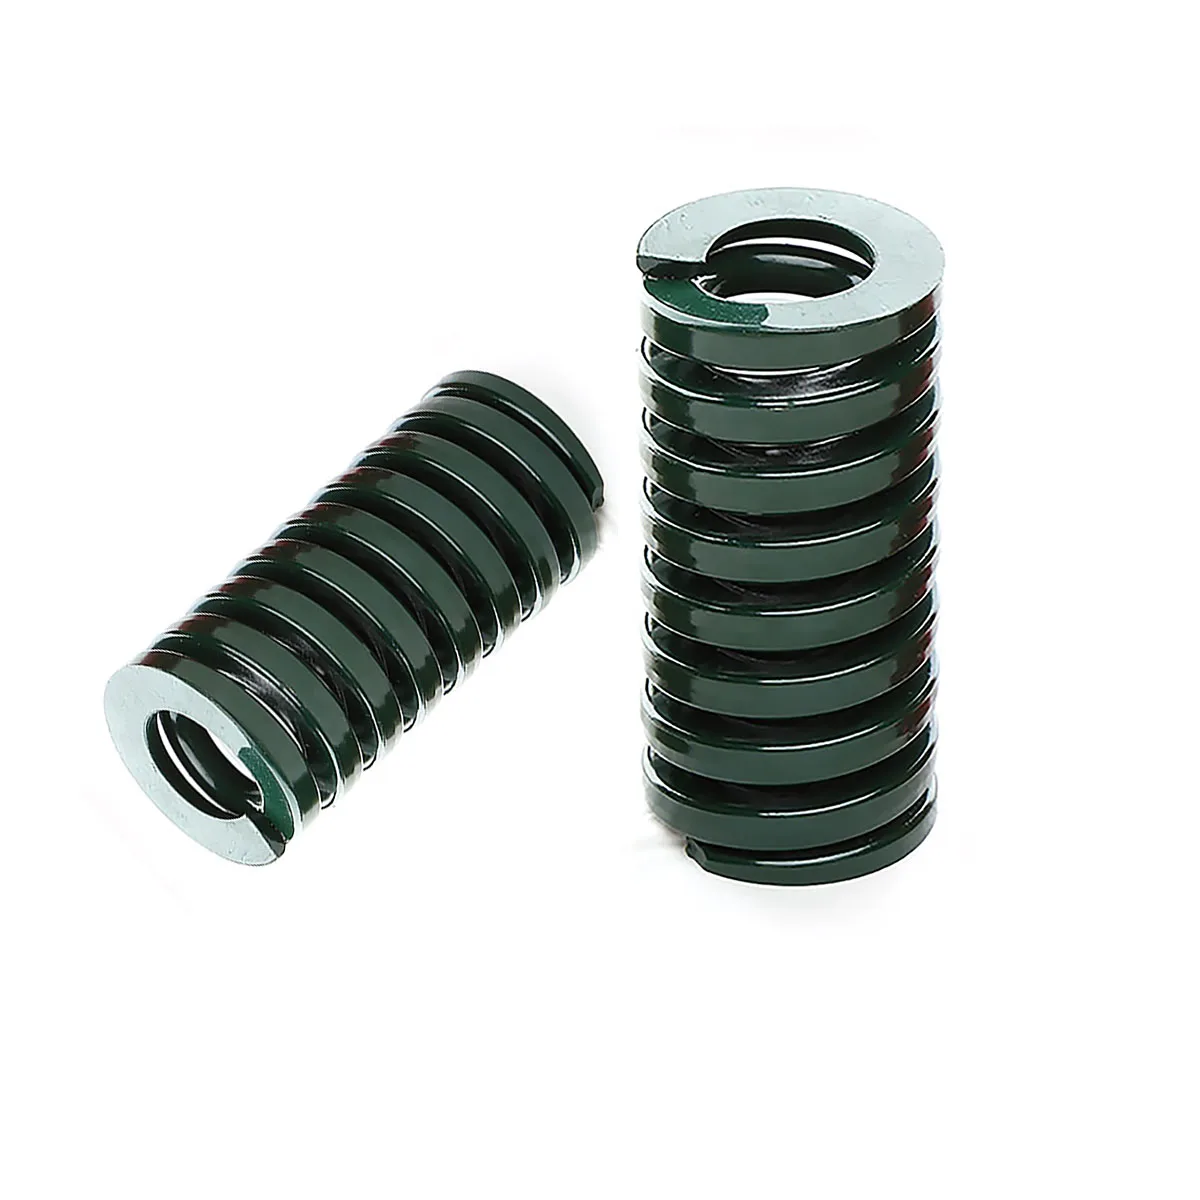 

1PCS Mould Die Spring Outer Dia 10mm Inner Dia 5mm Green Long Light Load Stamping Compression Mould Die Spring Length 15-100mm